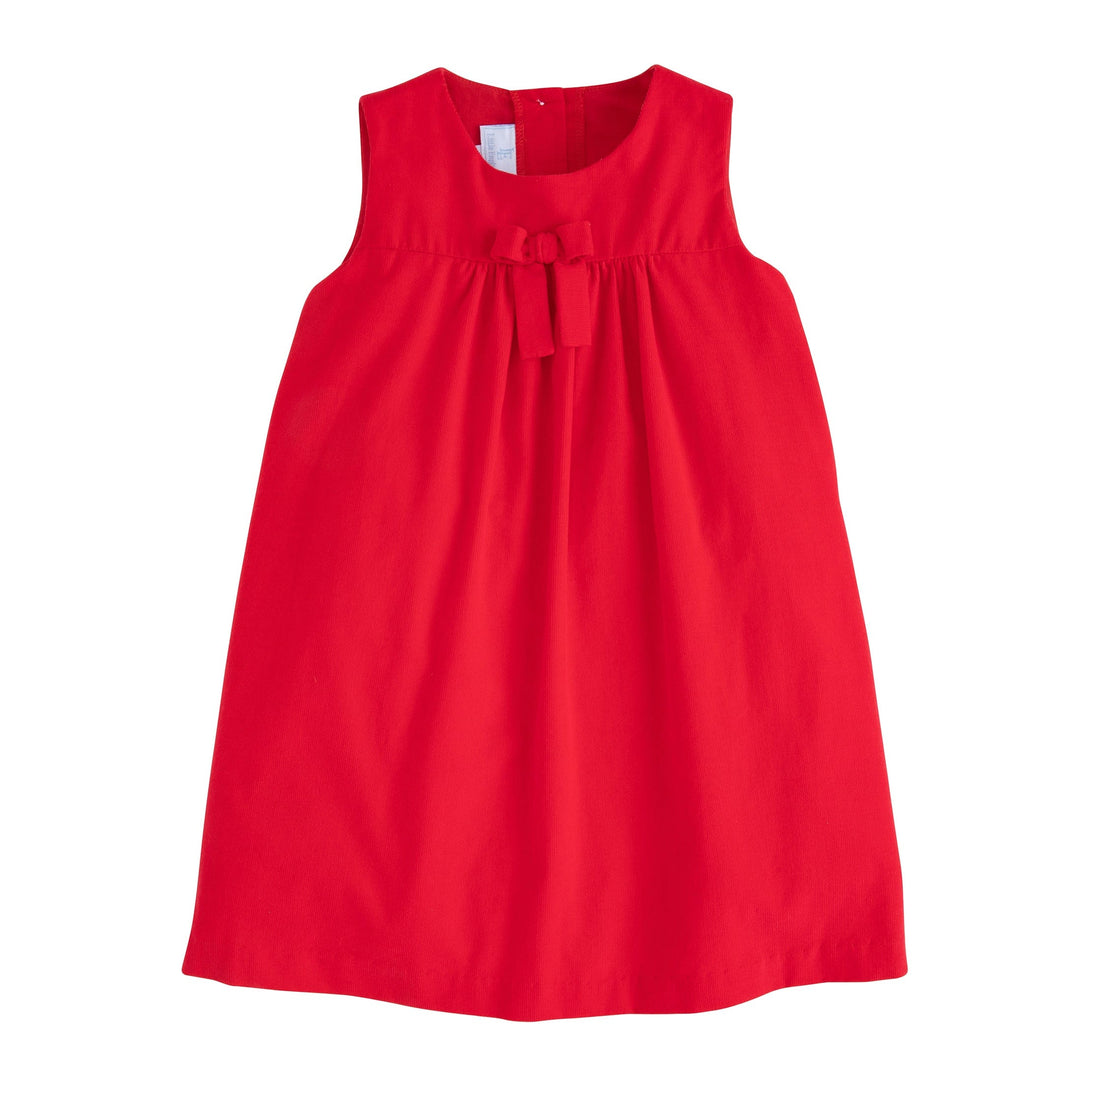 little english classic childrens clothing girls sleeveless red pleated jumper with a red bow on chest